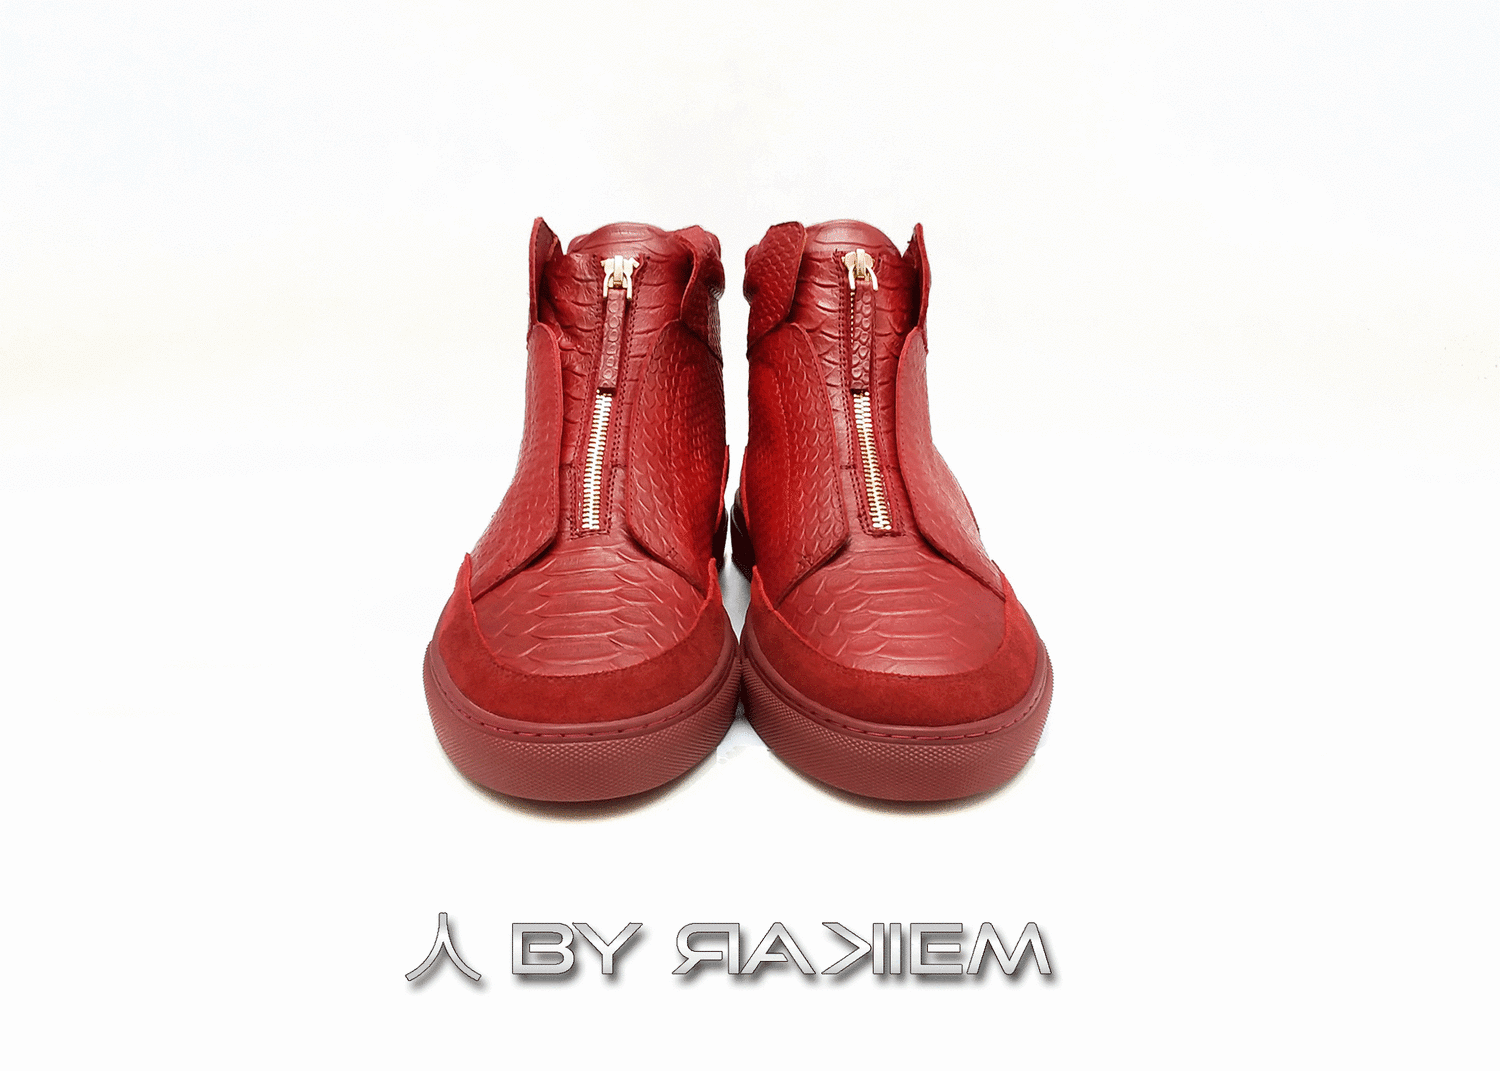 Character By Rakiem Red Leather & Suede High-Top Sneaker